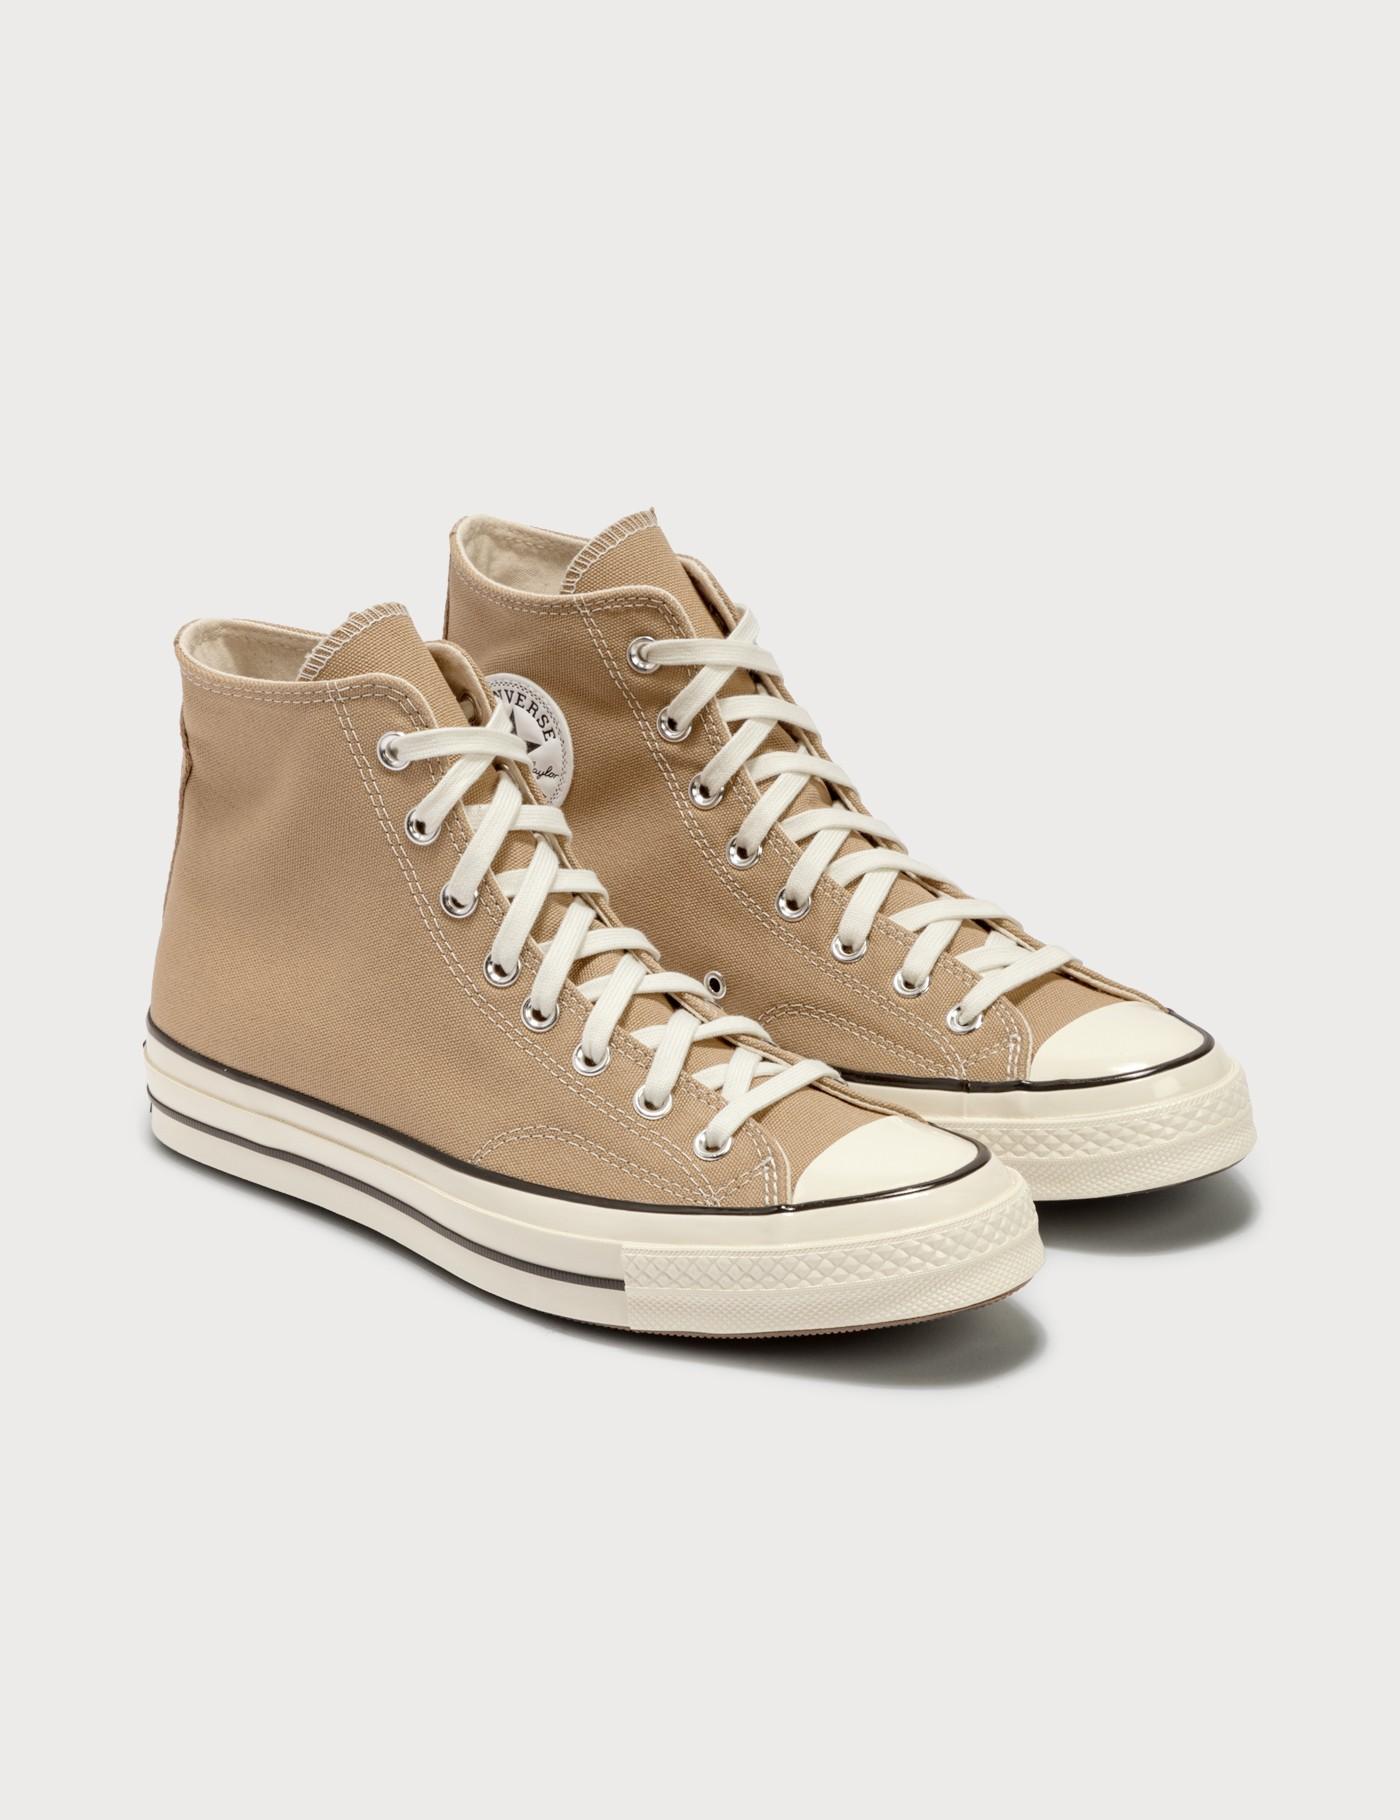 Converse Canvas Chuck 70 in Beige (Natural) - Lyst